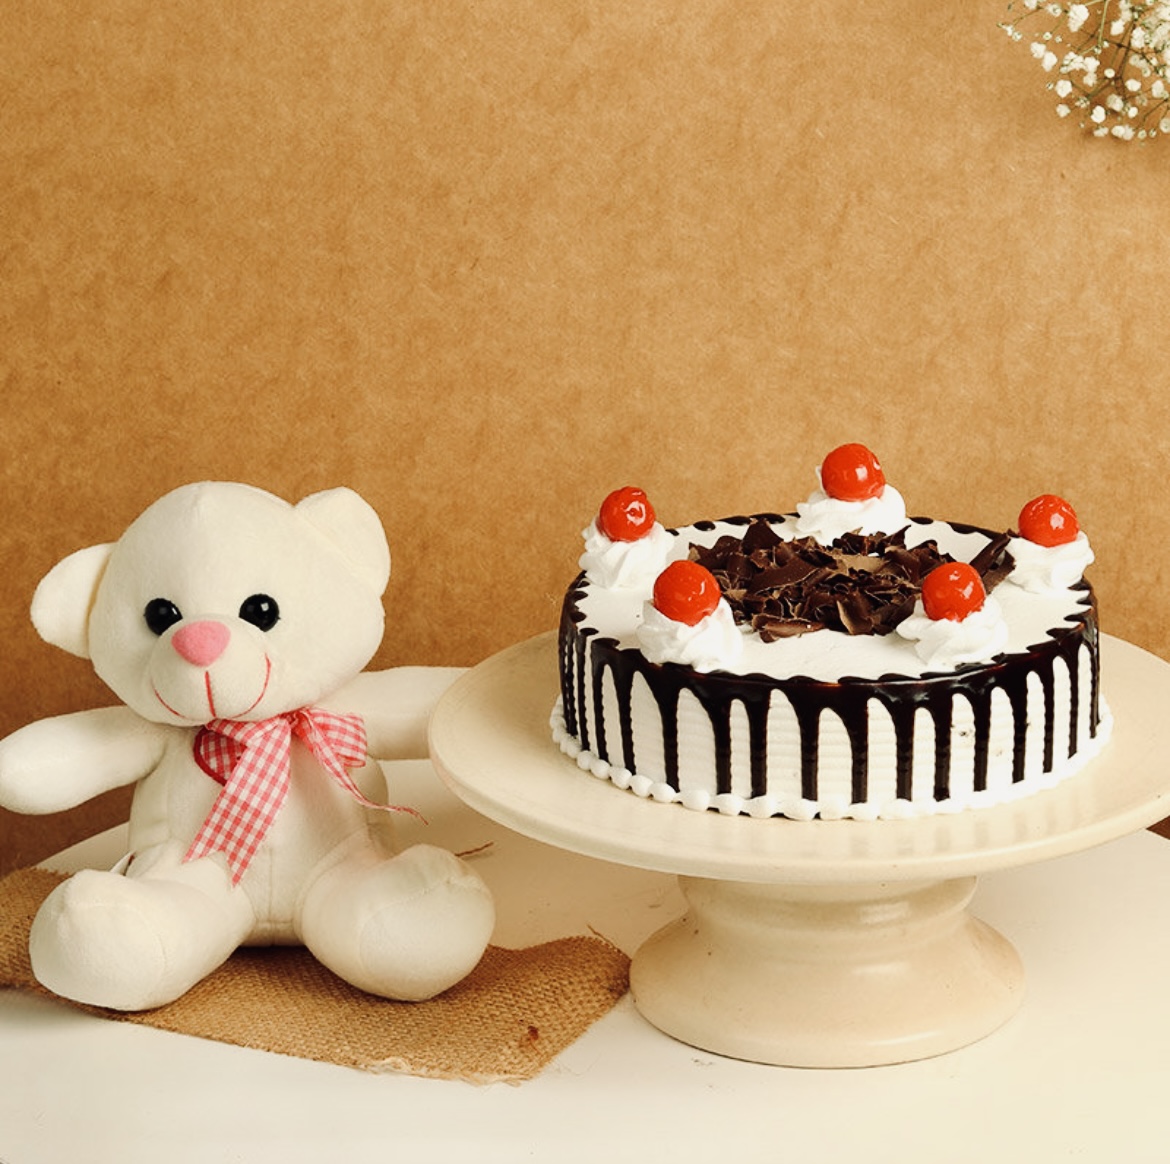 Bunny n Teddy Theme Cake Delivery Chennai, Order Cake Online Chennai, Cake  Home Delivery, Send Cake as Gift by Dona Cakes World, Online Shopping India